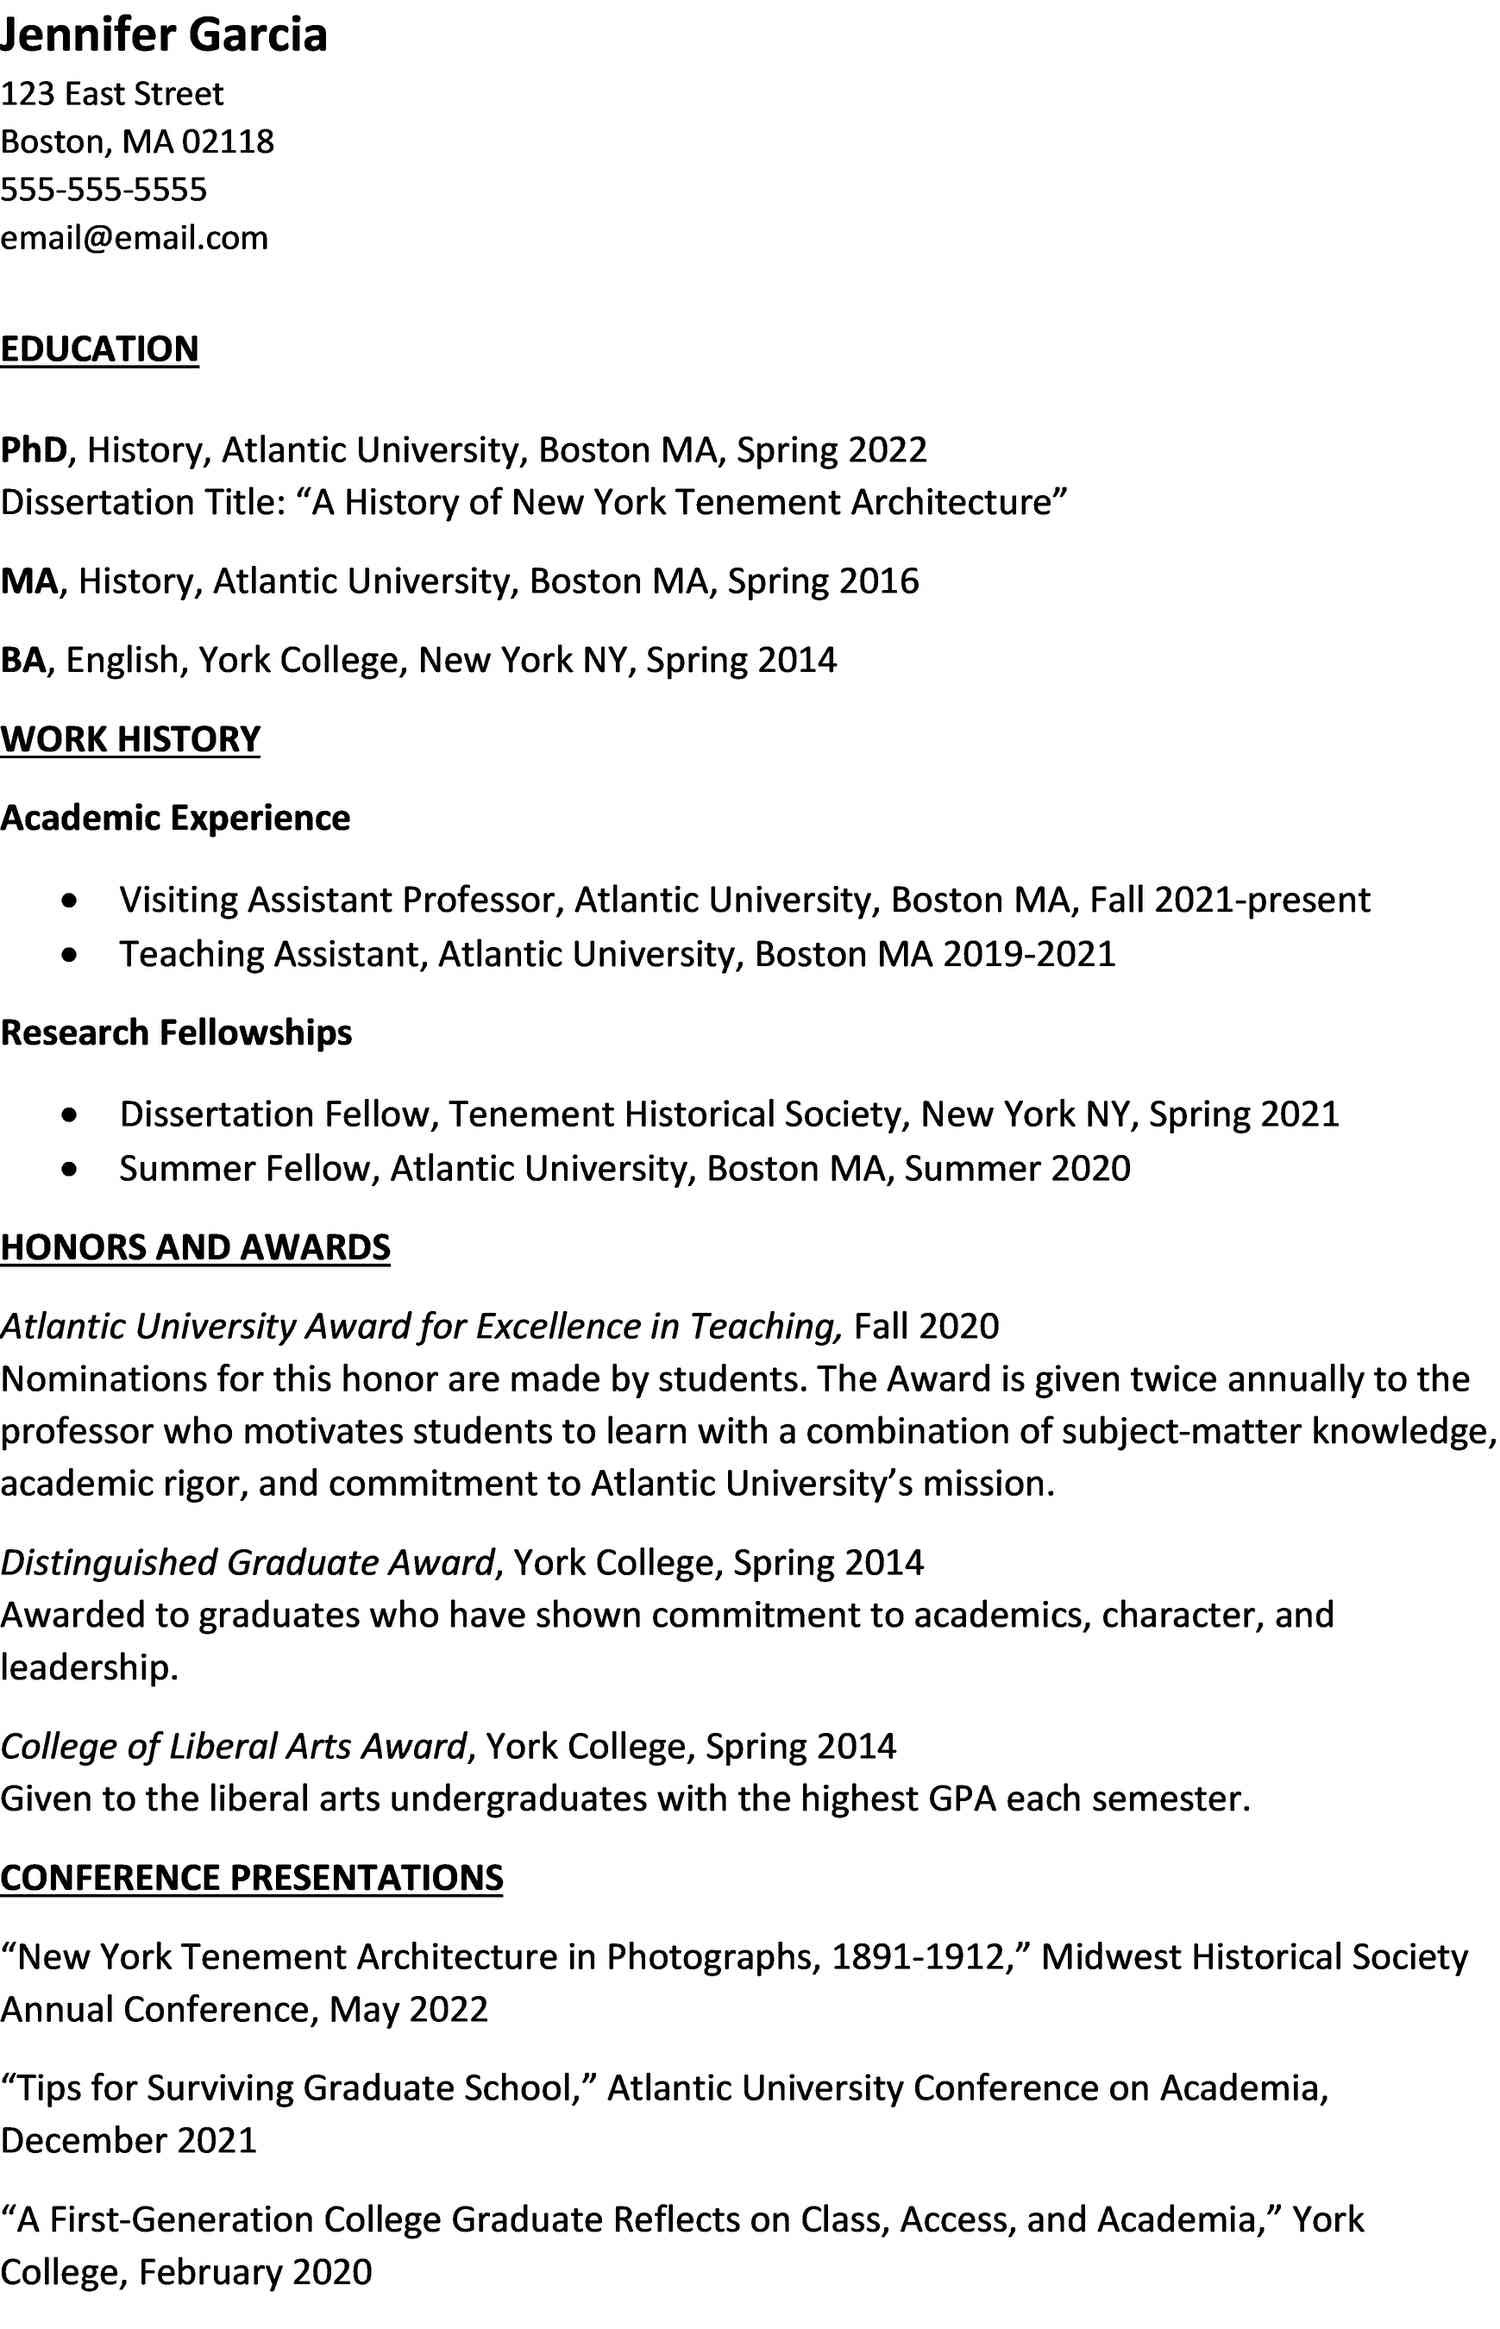 Sample Honors and Awards On Resume Curriculum Vitae (cv) Template and Writing Tips